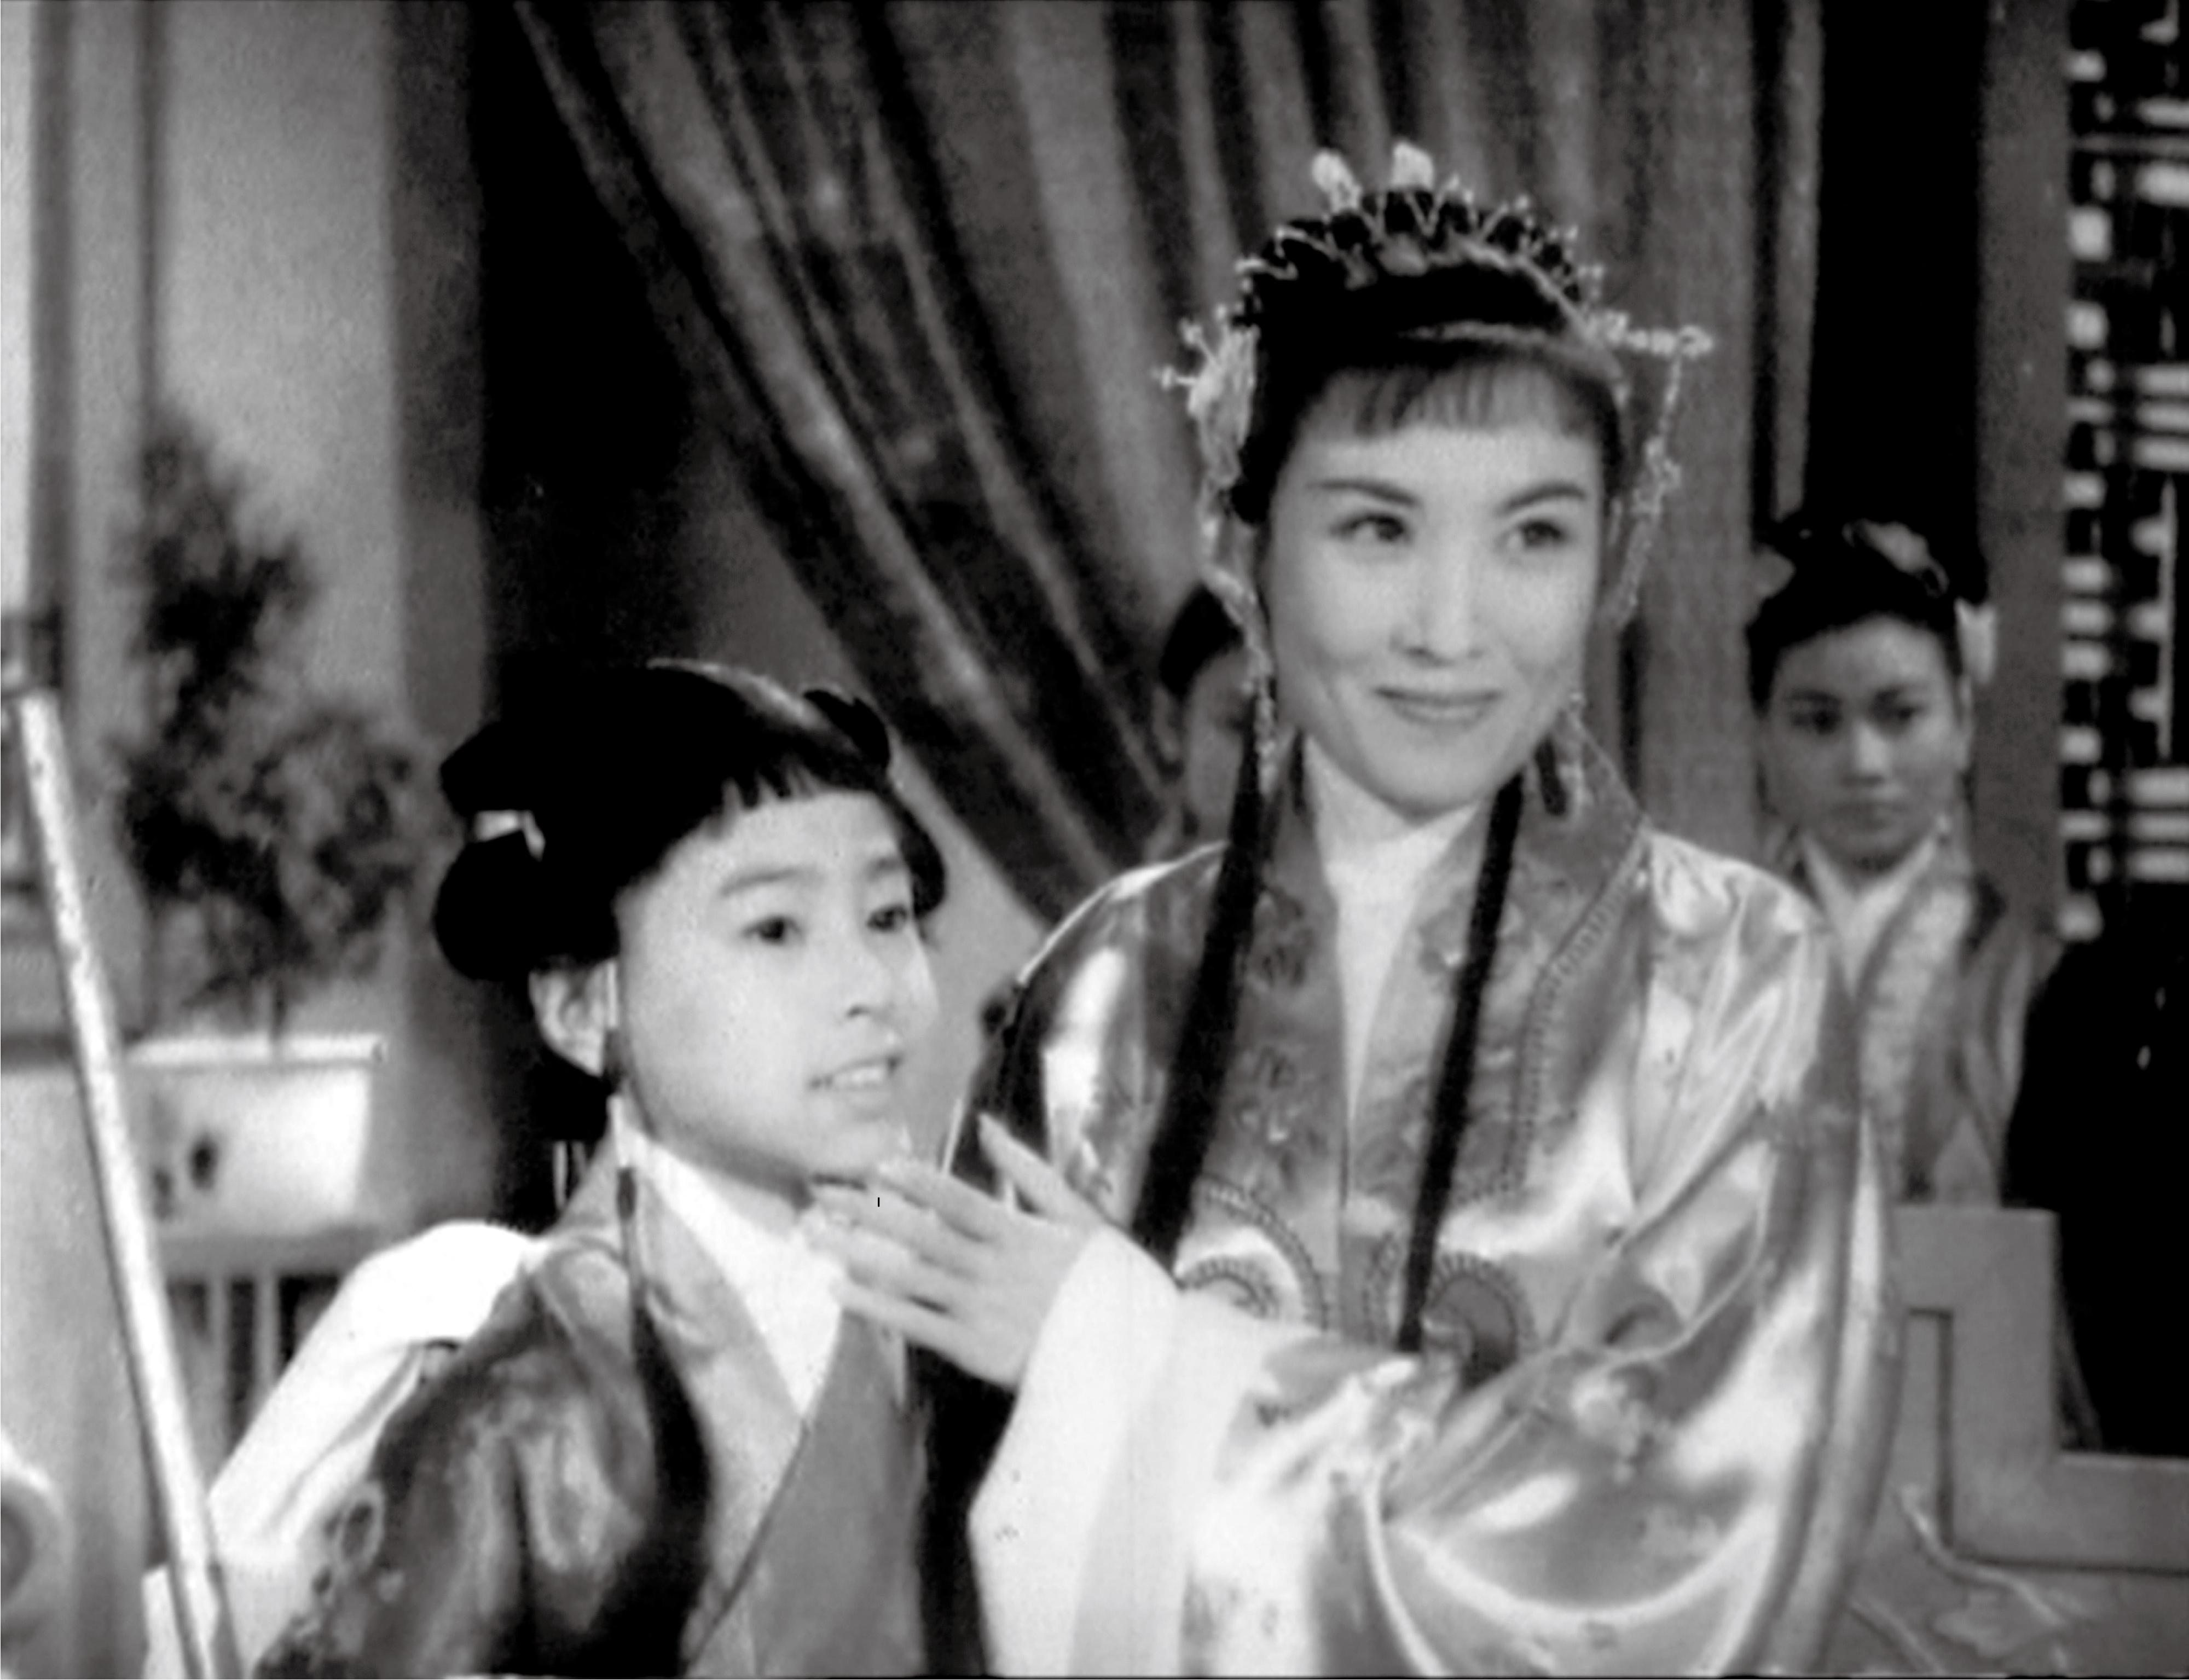 To celebrate the 70th anniversary of the career of renowned Cantonese opera actor Yuen Siu-fai in performing arts, the Hong Kong Film Archive (HKFA) of the Leisure and Cultural Services Department will present the screening programme "From the Heart - Celebrating the 70-year Career of Yuen Siu-fai". Five of his most accomplished films will be screened from November 22 (Wednesday) to November 26 (Sunday) at the HKFA Cinema. Photo shows a film still of "How Nazha Rescued His Mother from the Snake Mountain" (1960).